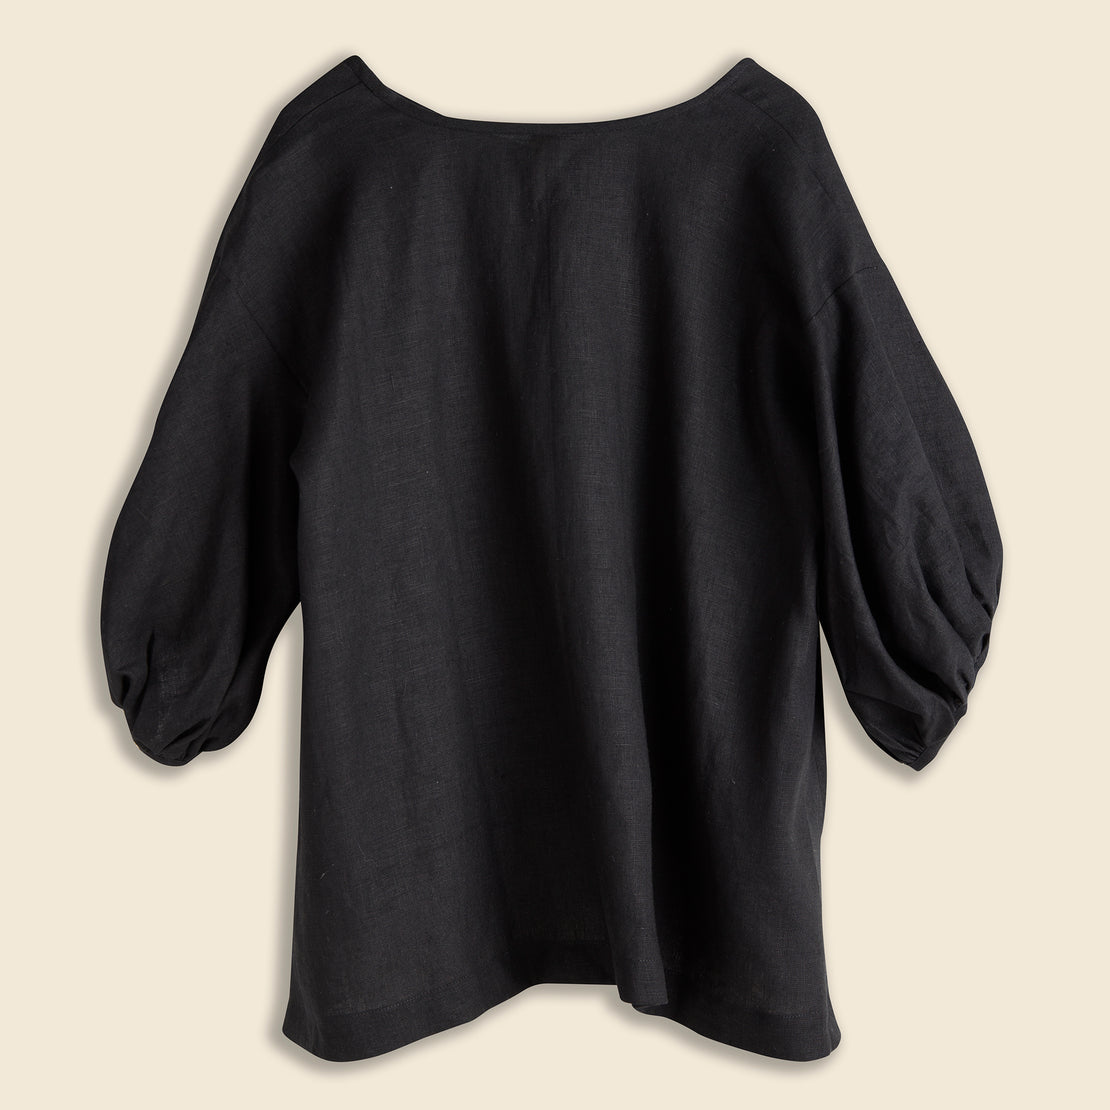 Sousi Top - Black - Limo - STAG Provisions - W - Tops - L/S Woven